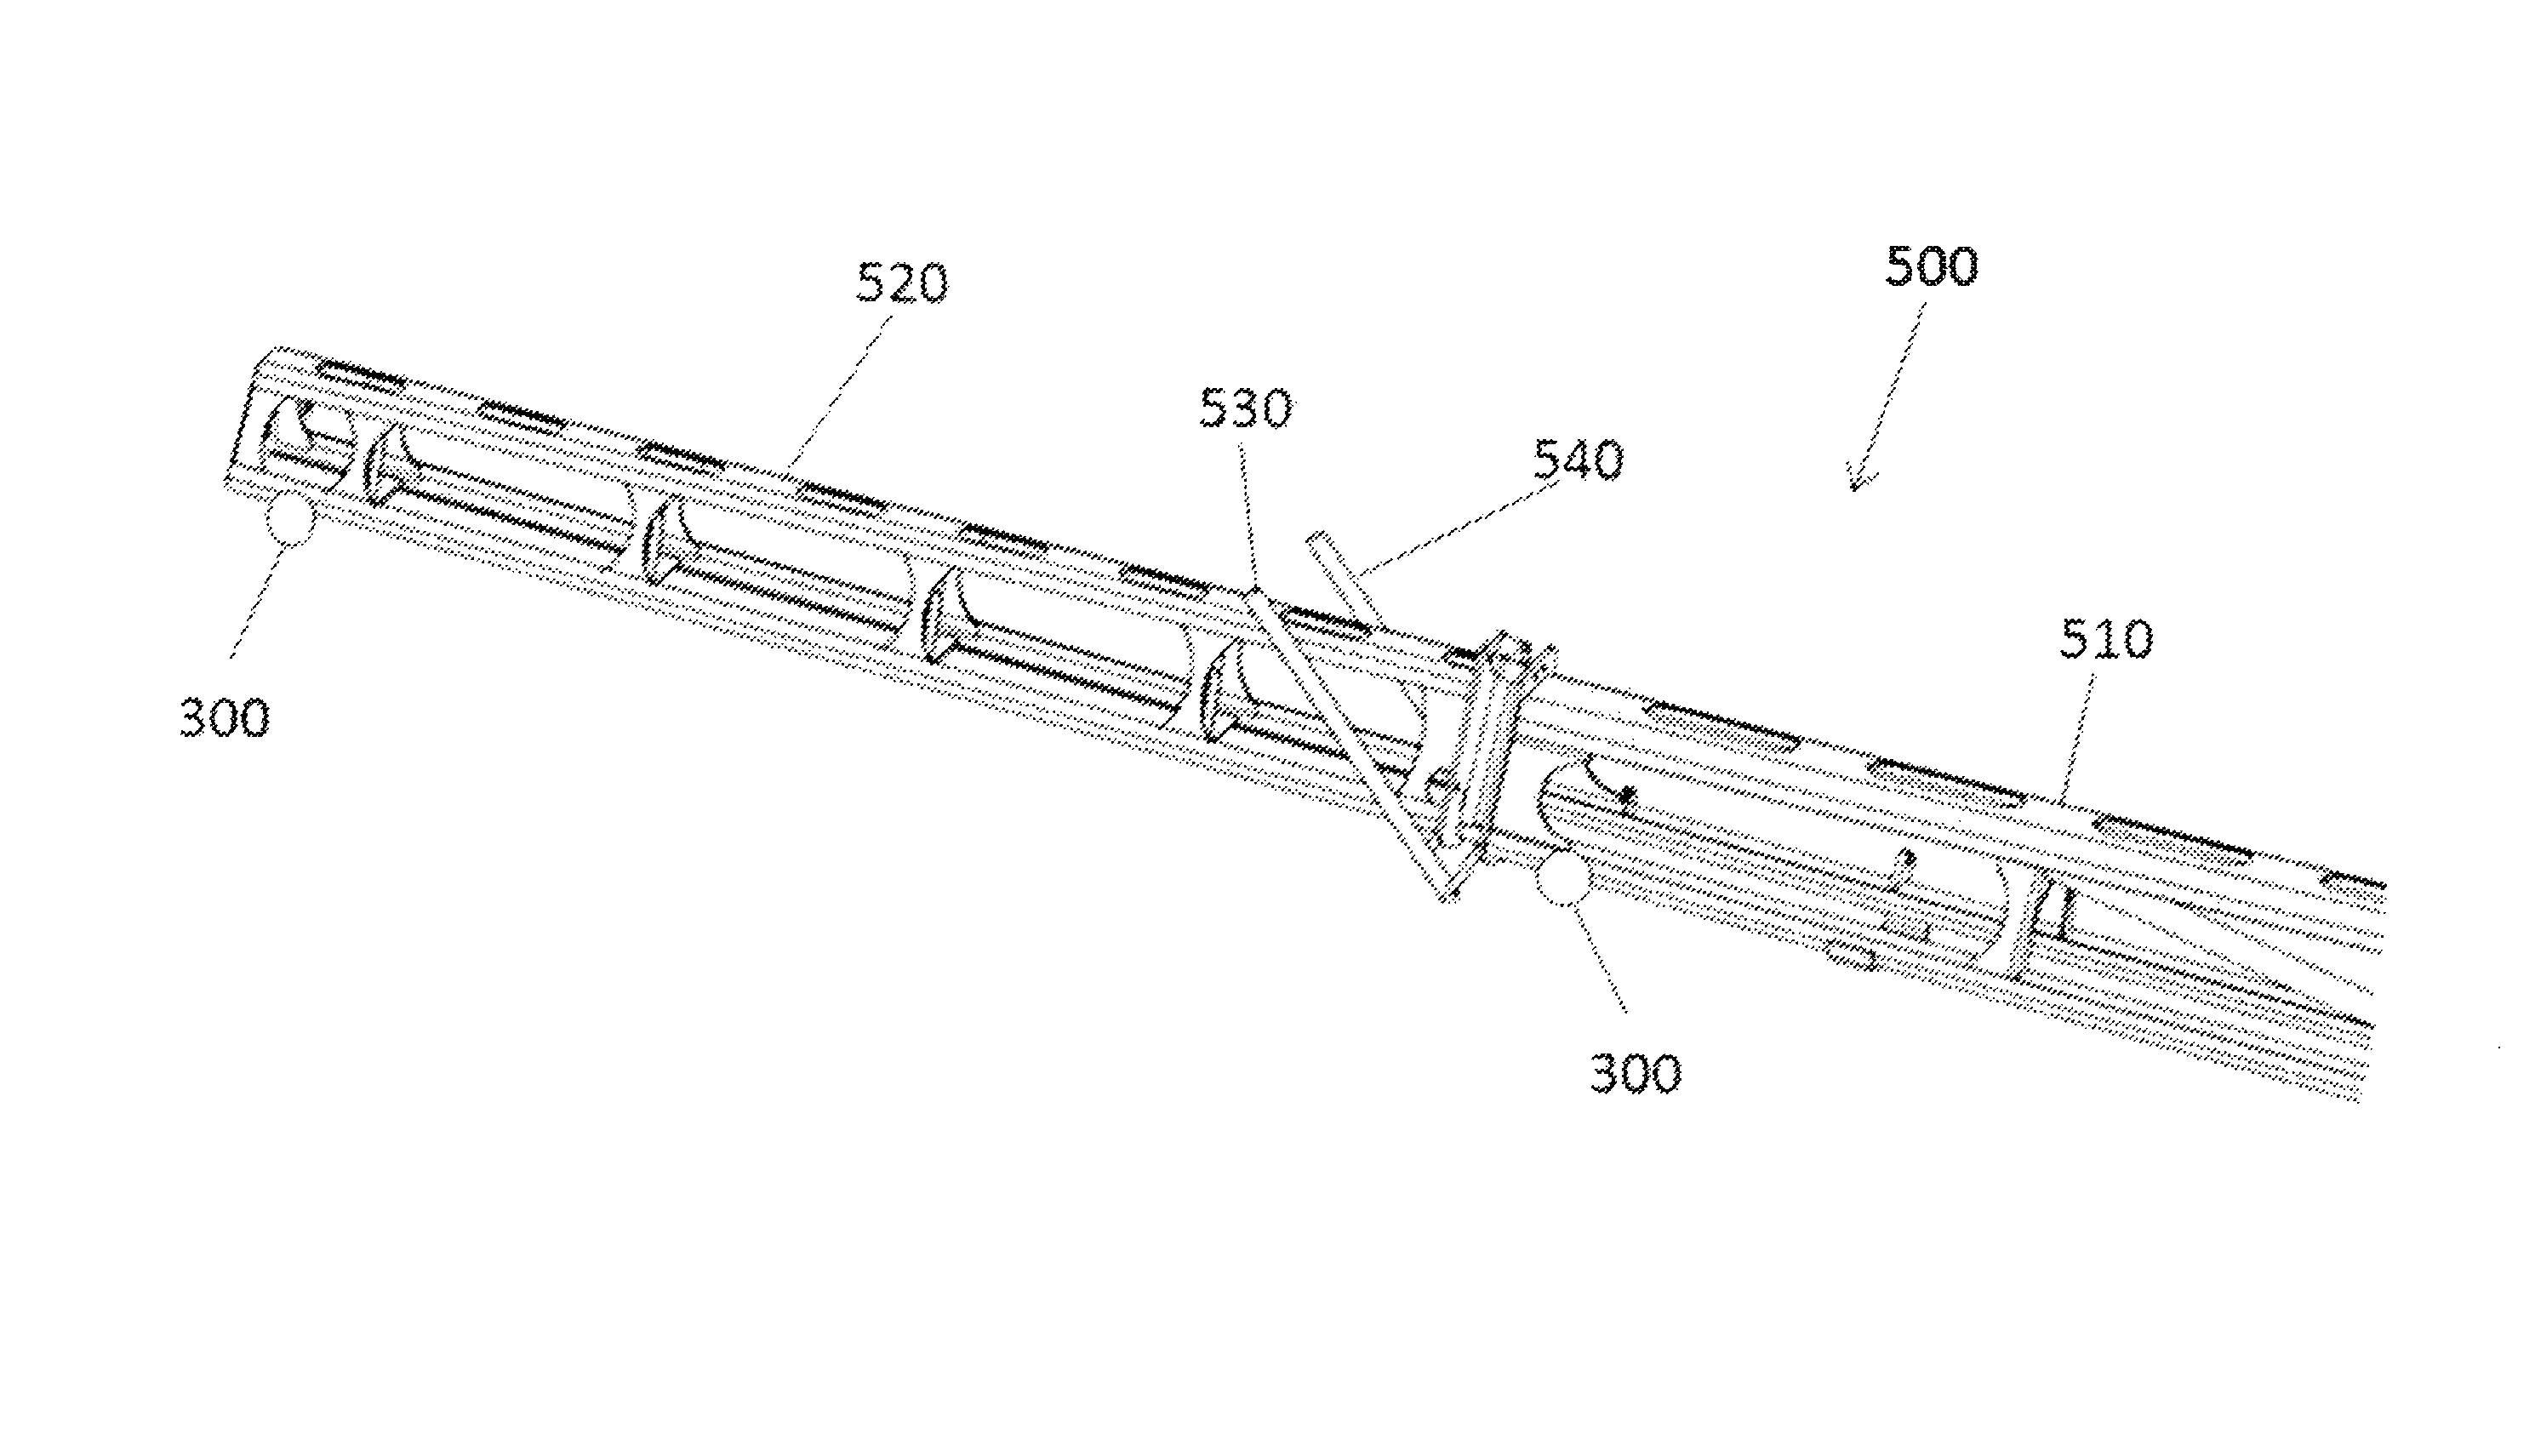 Planar linkage, methods of decoupling, mitigating shock and resonance, and controlling agricultural spray booms mounted on ground vehicles